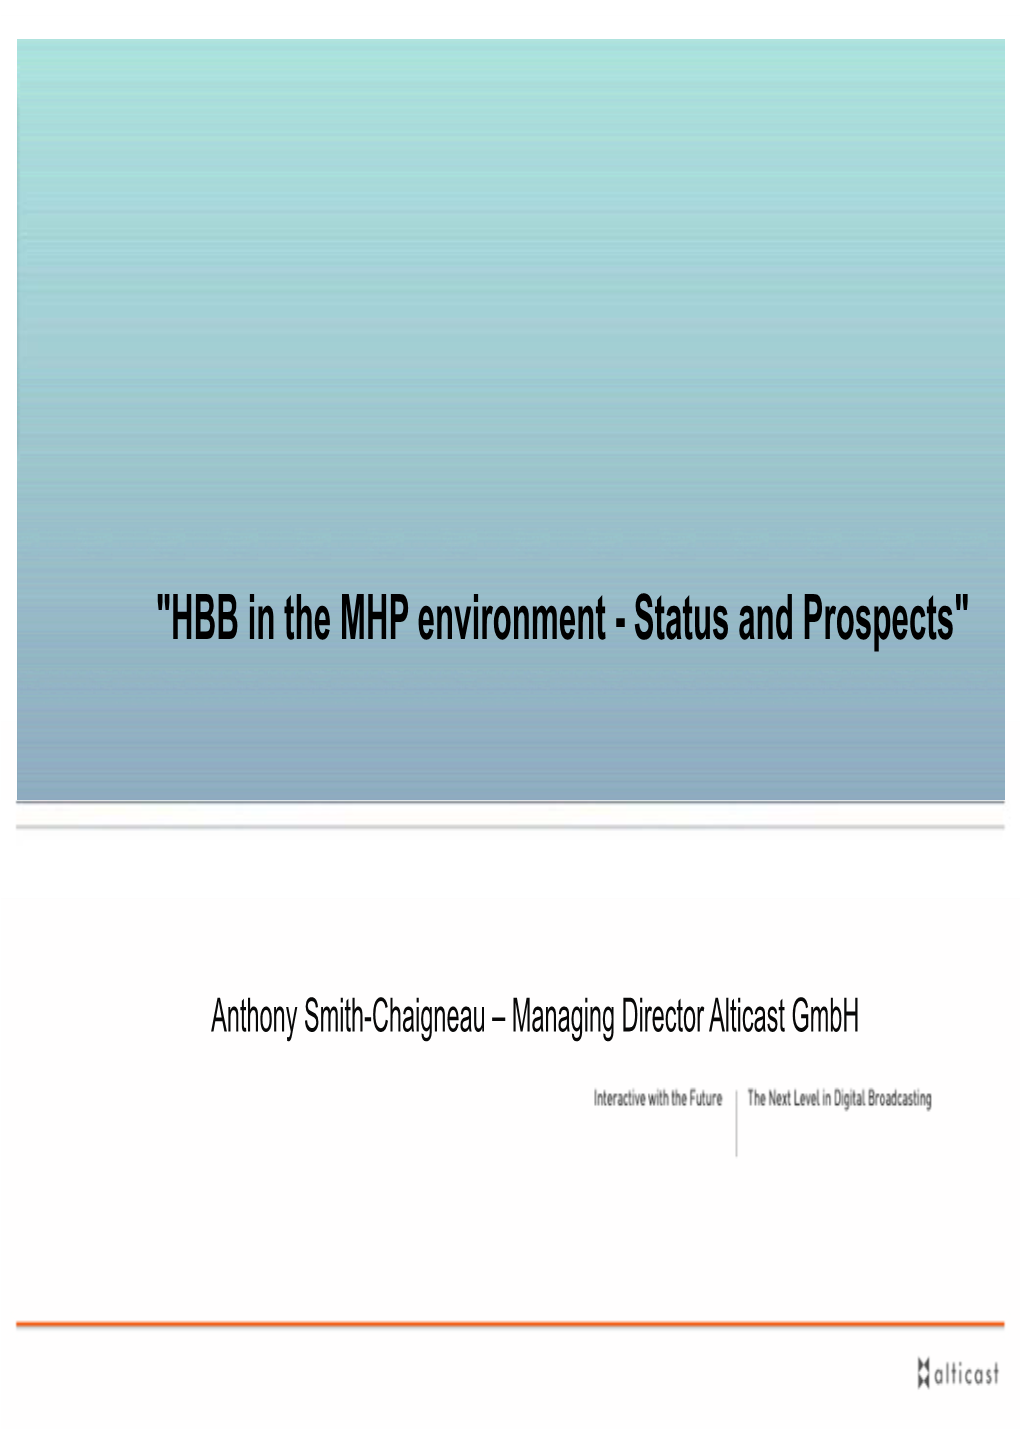 "HBB in the MHP Environment - Status and Prospects"